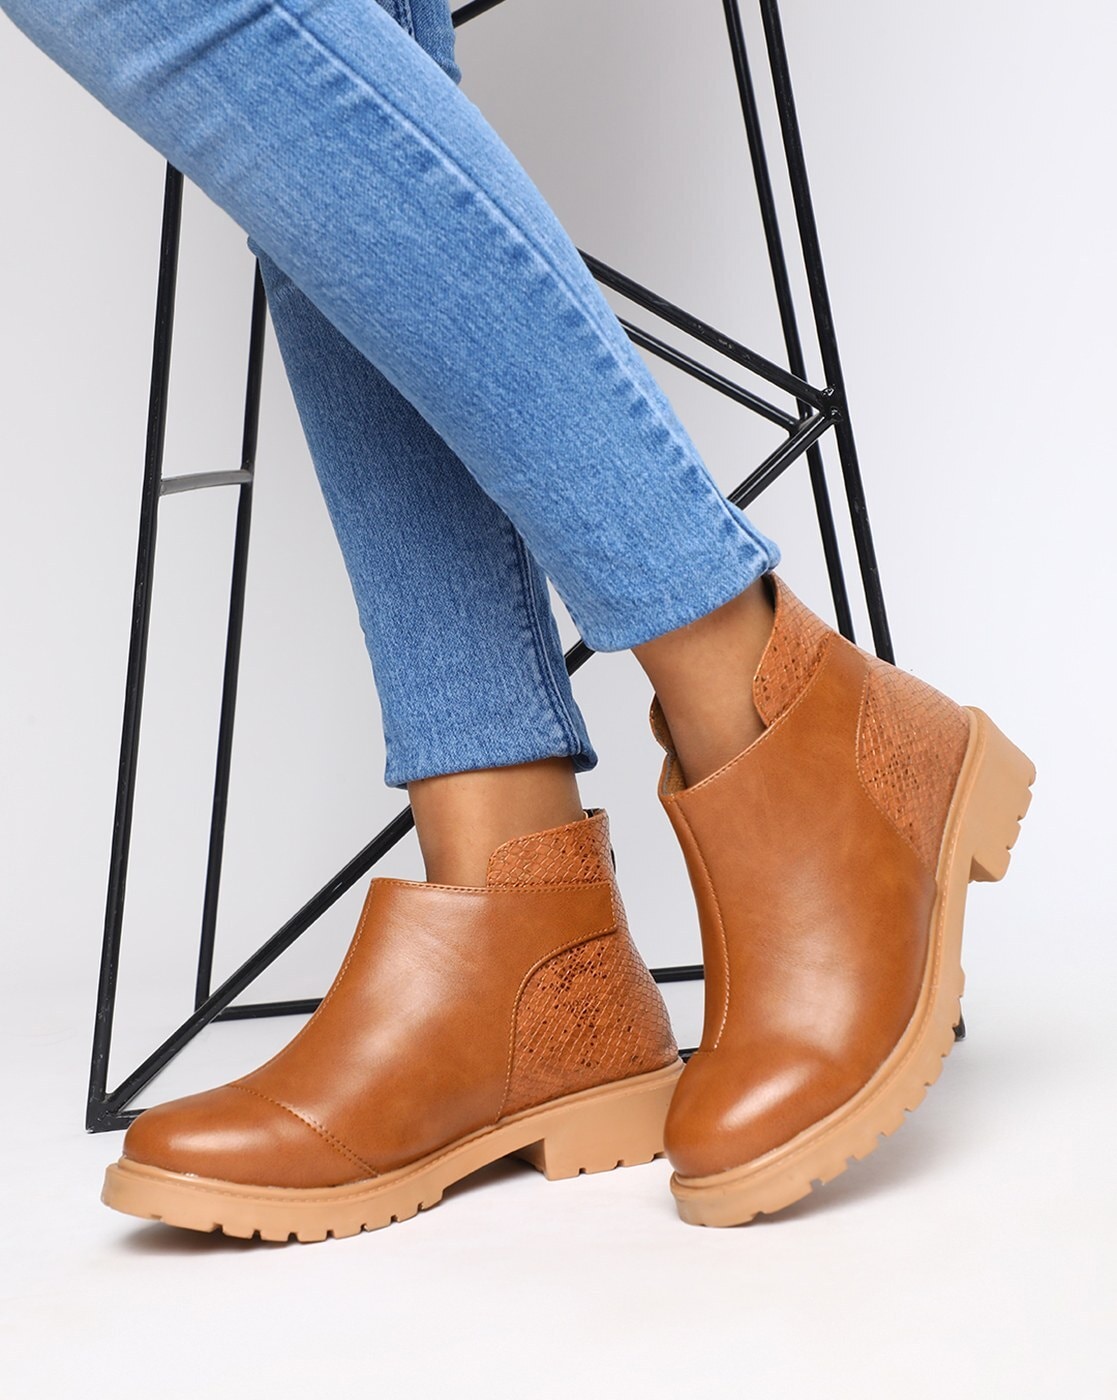 Women's Hailey Leather Heeled Boot from Crew Clothing Company